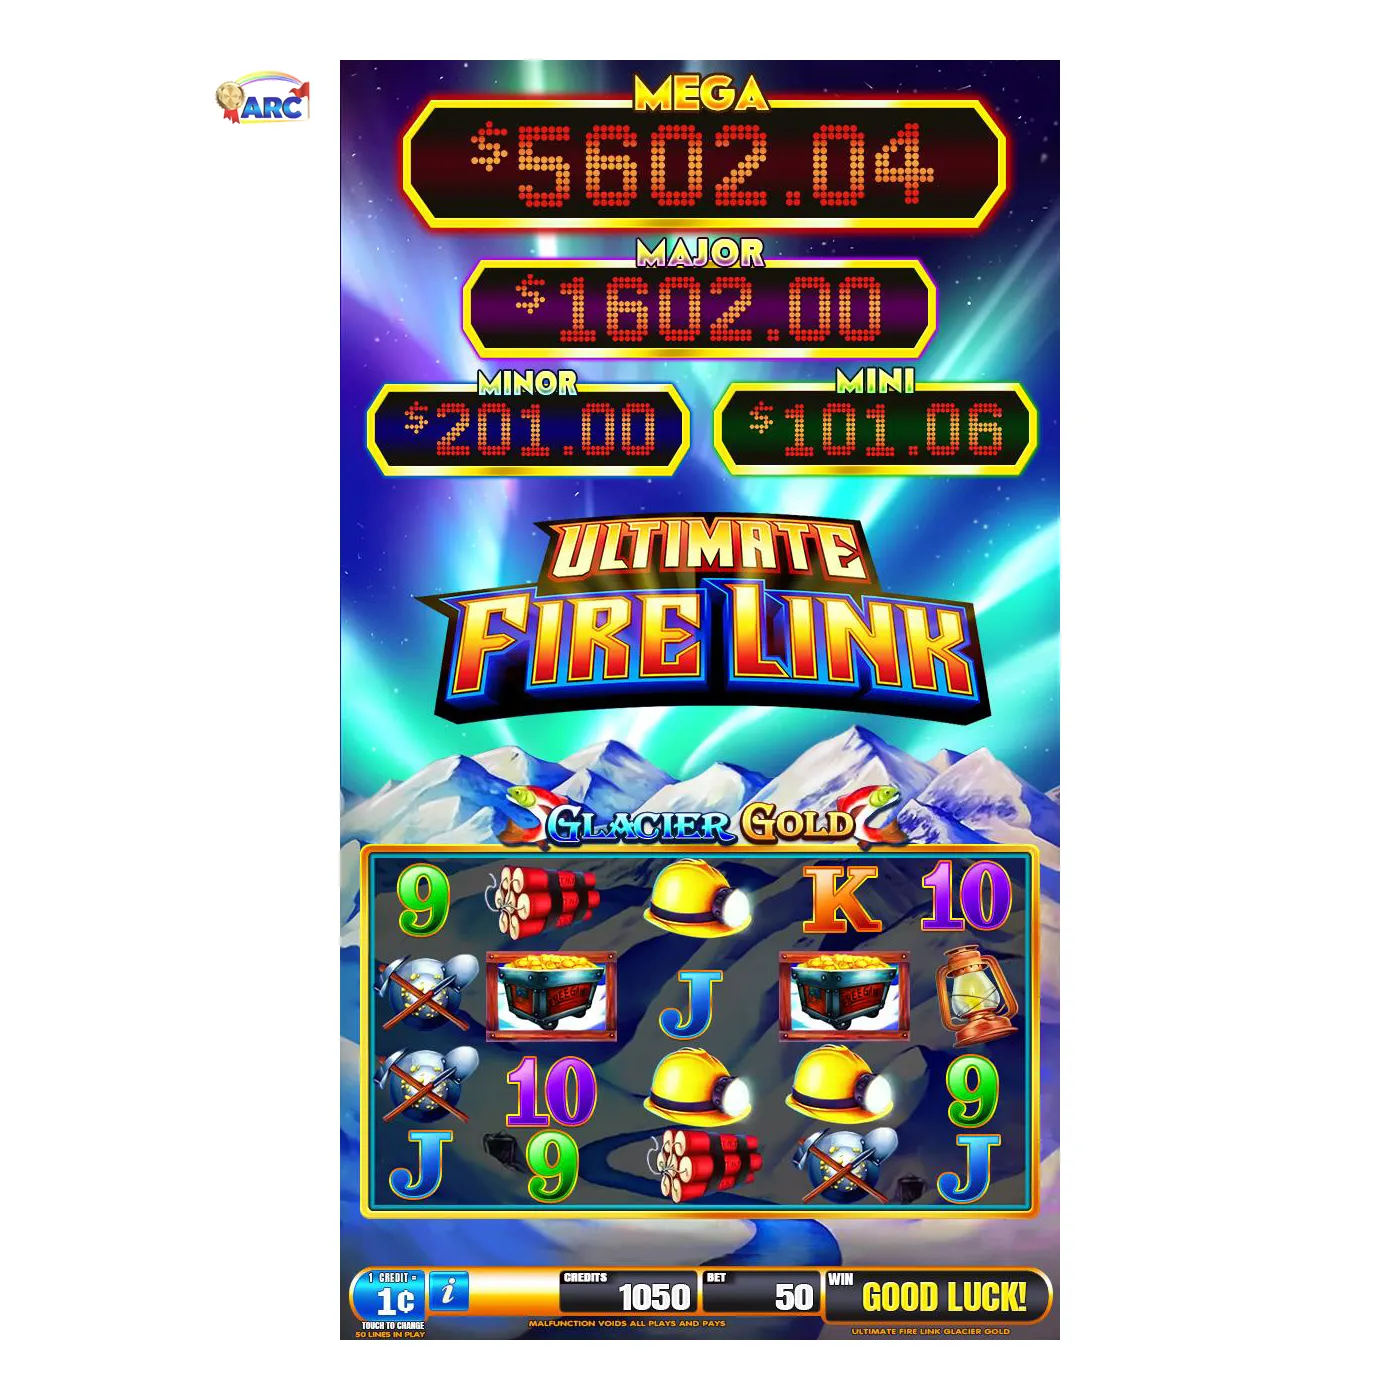 Ultimate Fire Link - Glacier Gold Ultimate Fire Link game Machines For Coin Operated Games